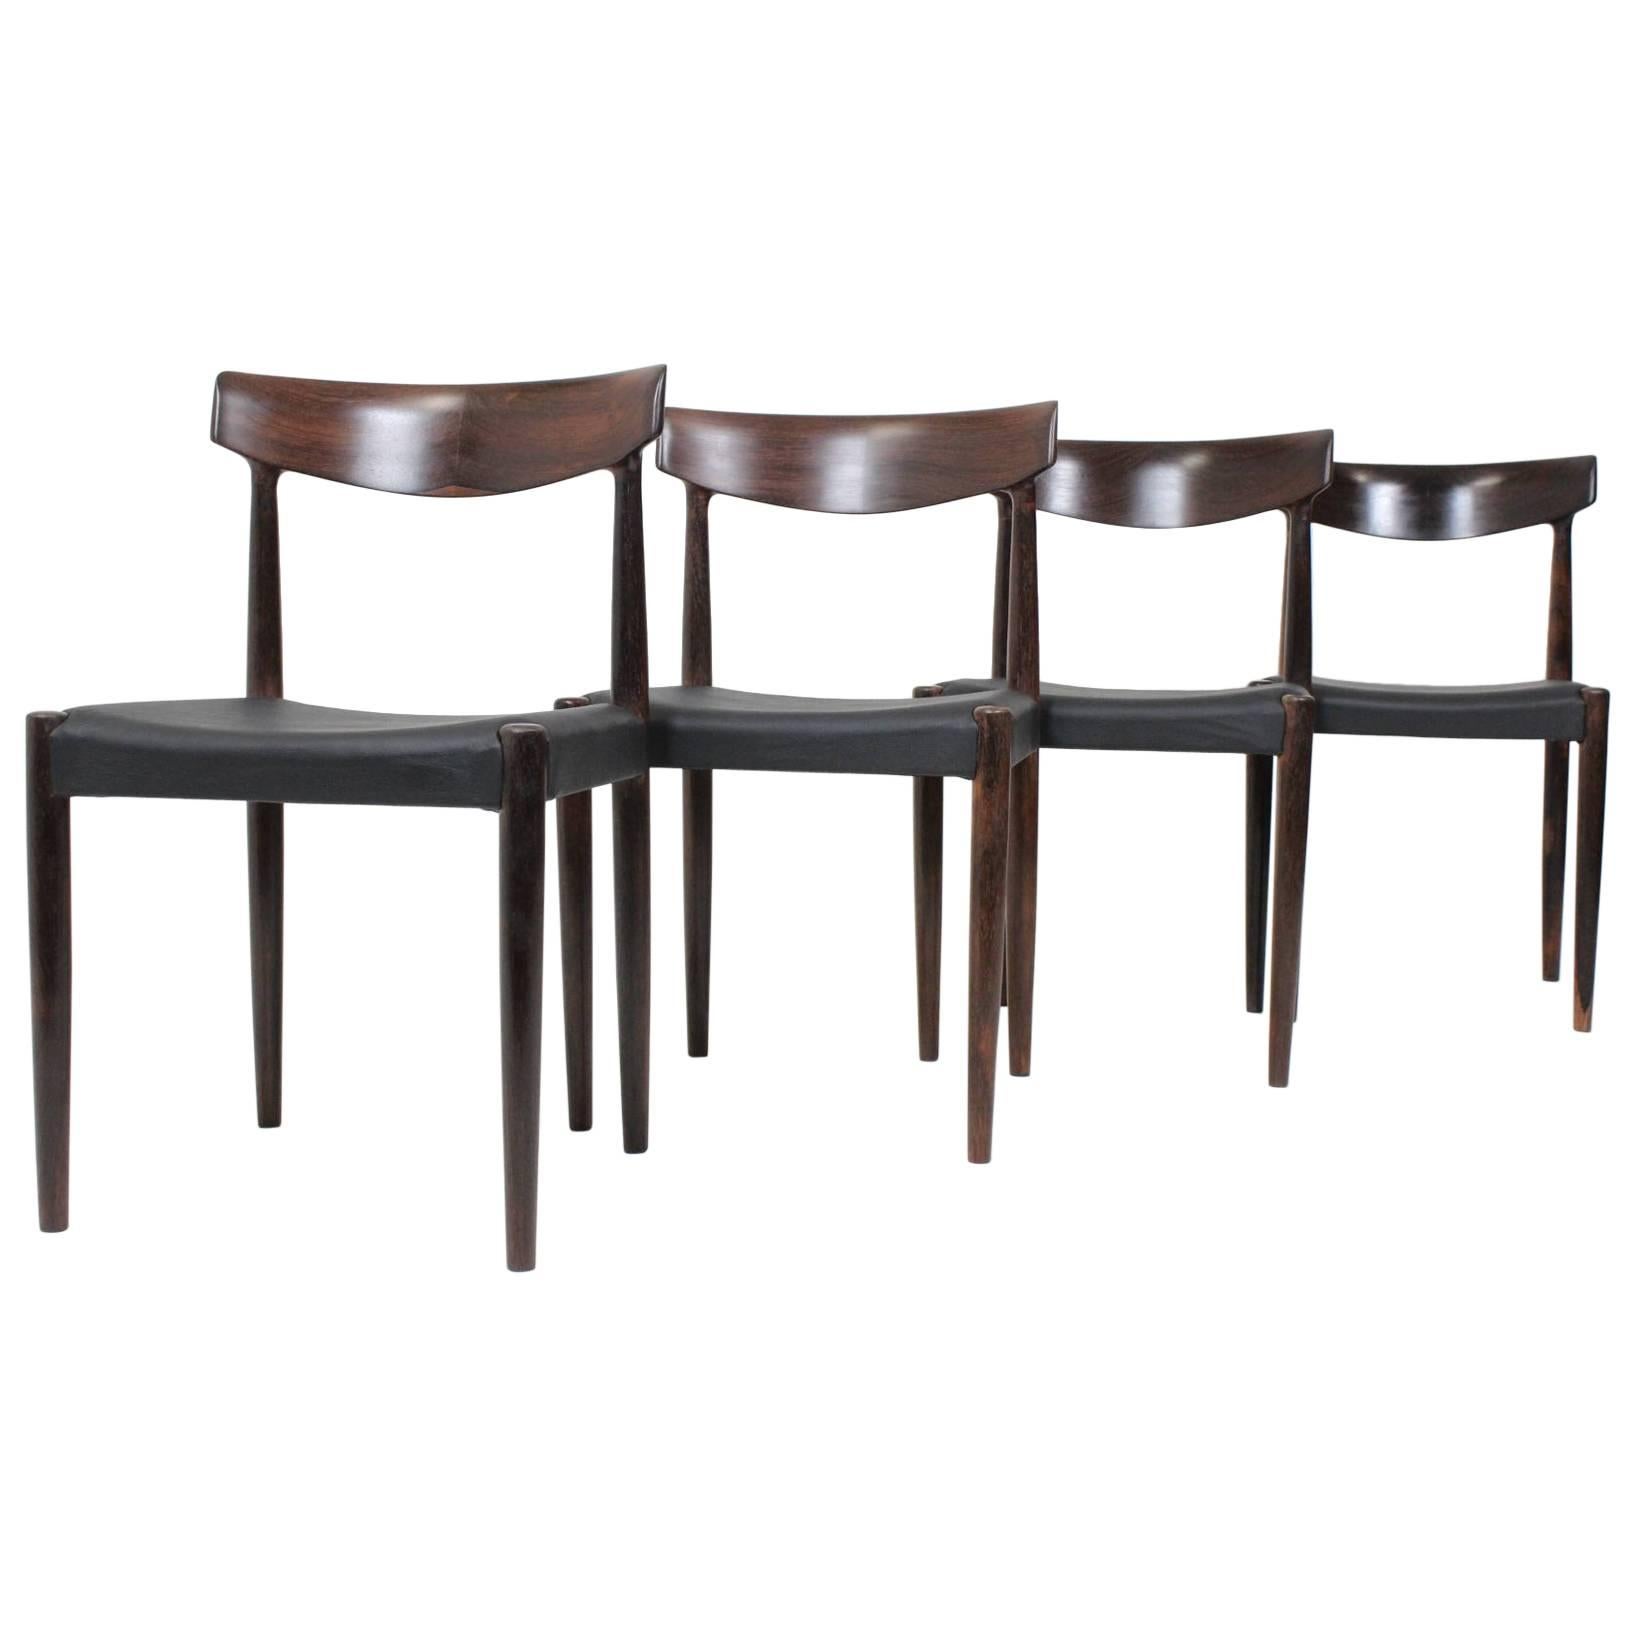 Set of Four Dining Palisander Chairs Attributed to Knud Faerch